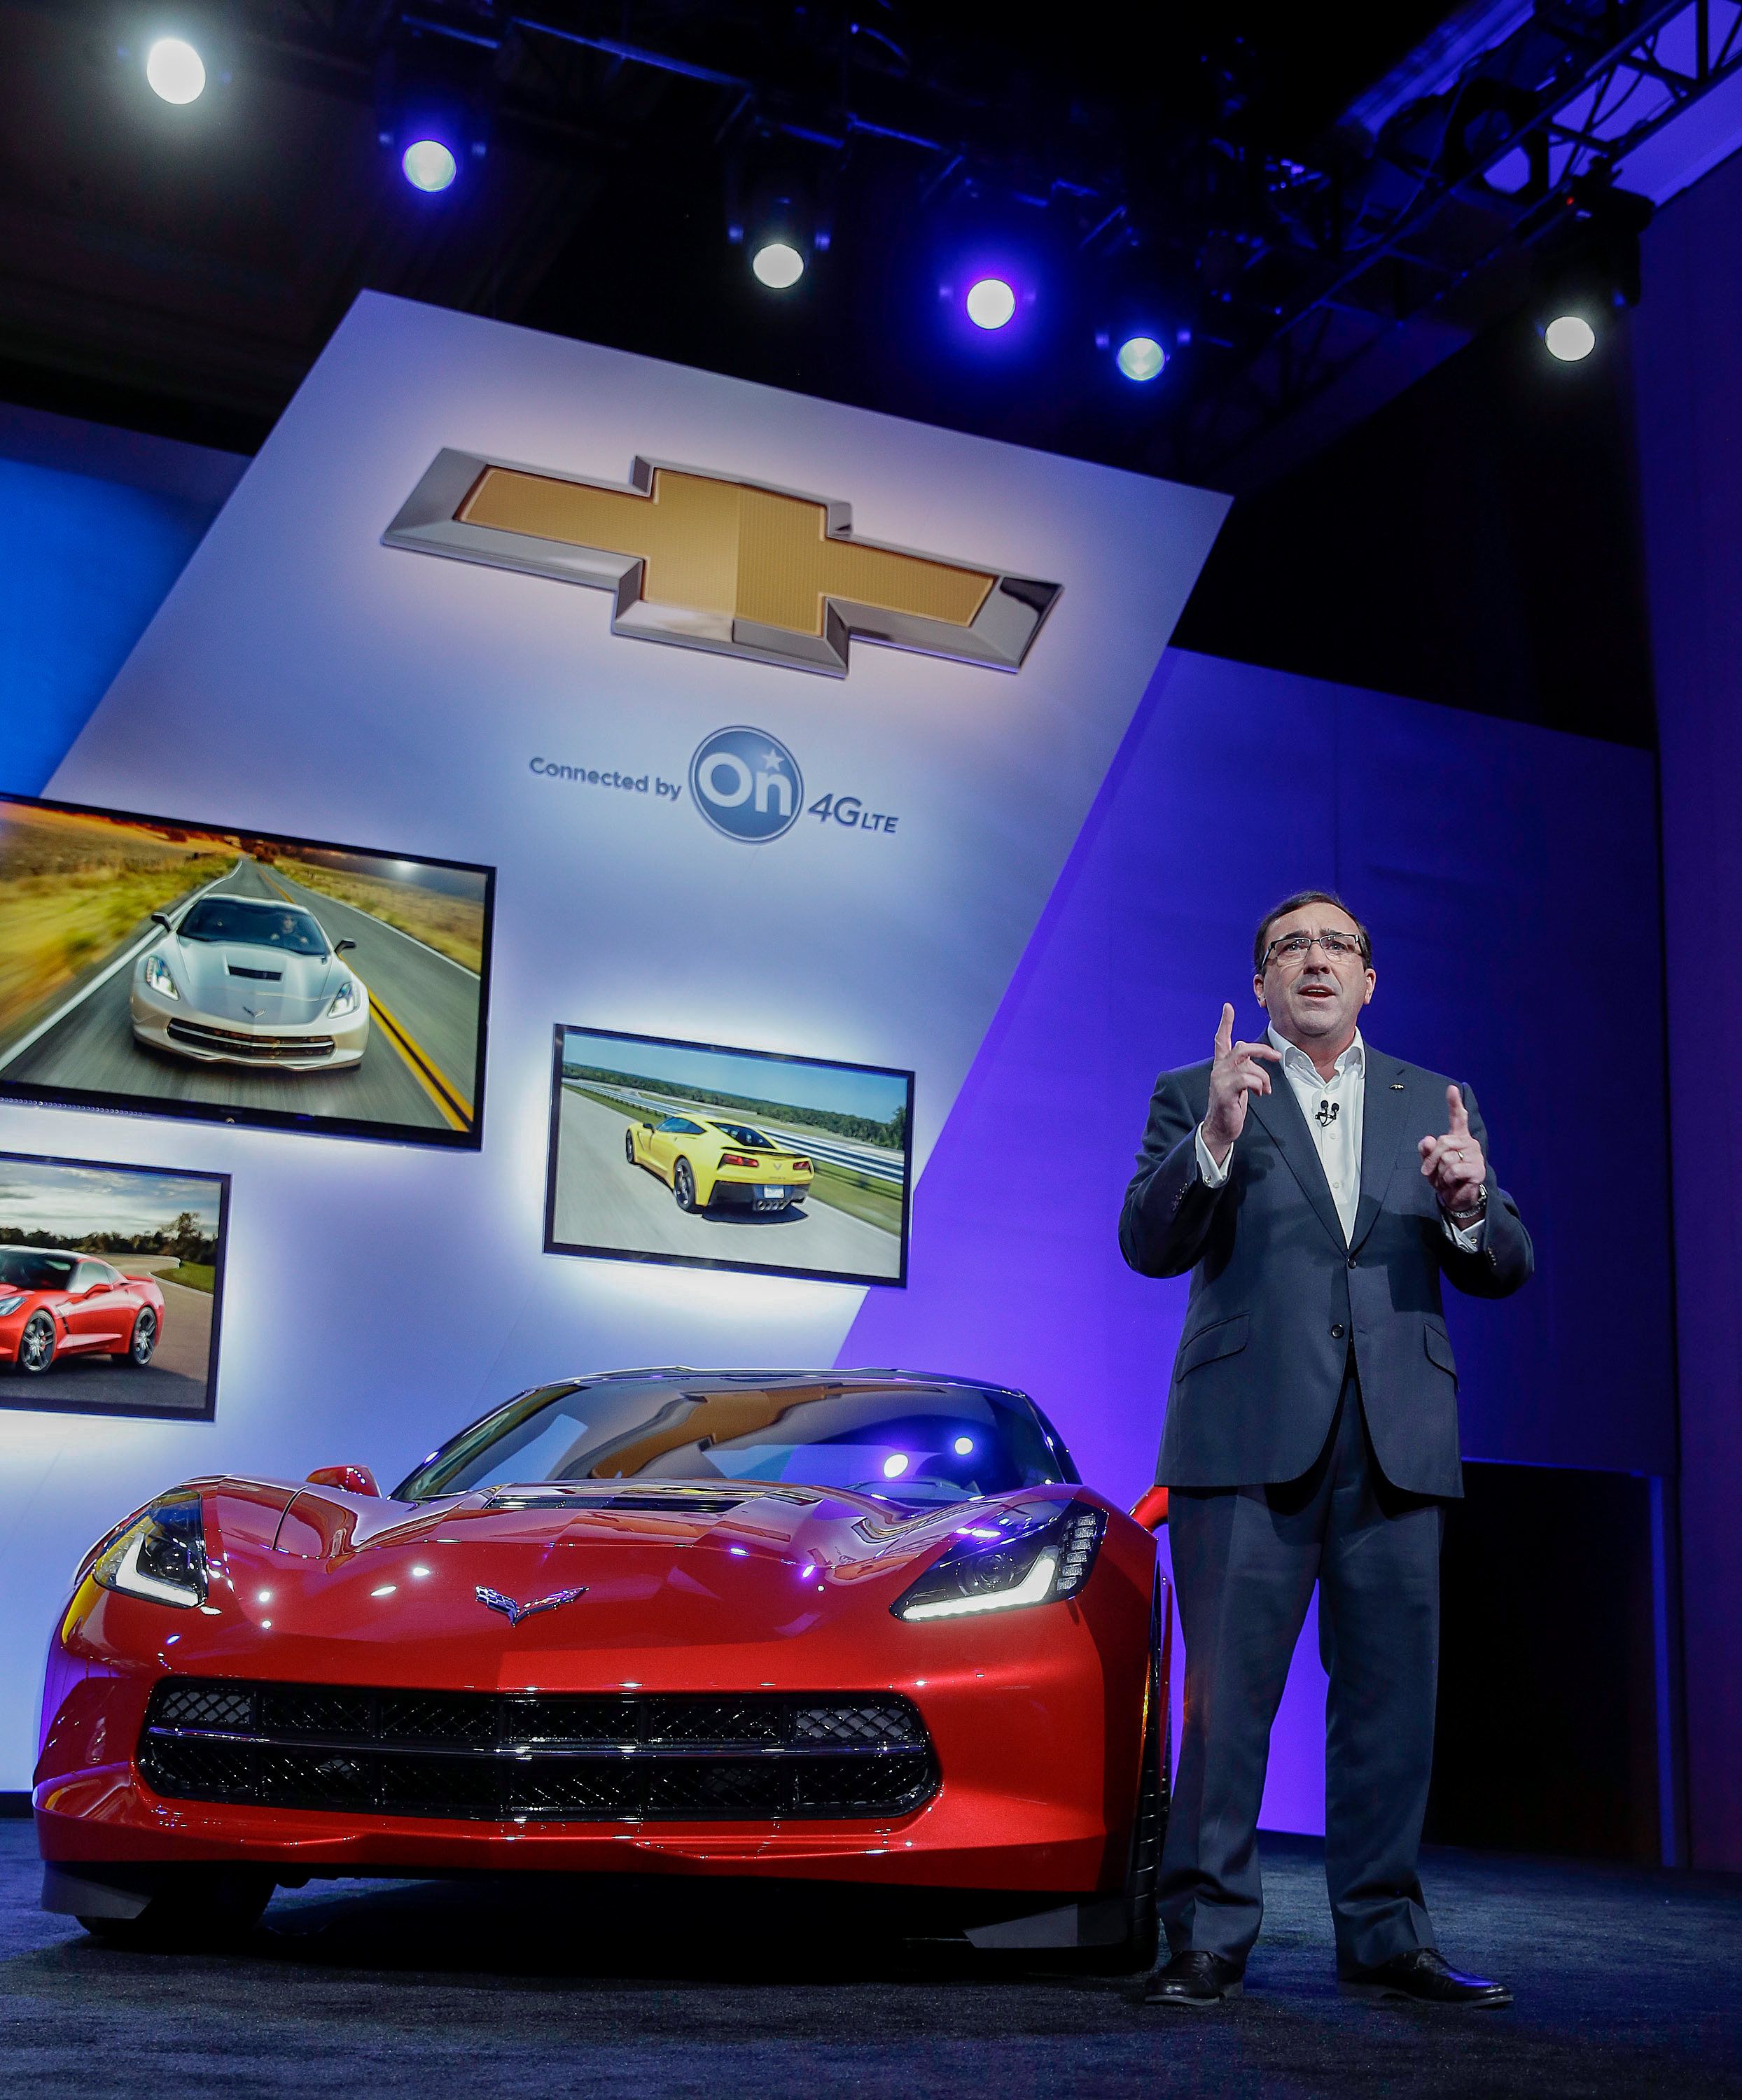 A Girls Guide To Cars | Chevrolet Appshop Unveiled At Ces 2014 - Ceschevroletonstar05